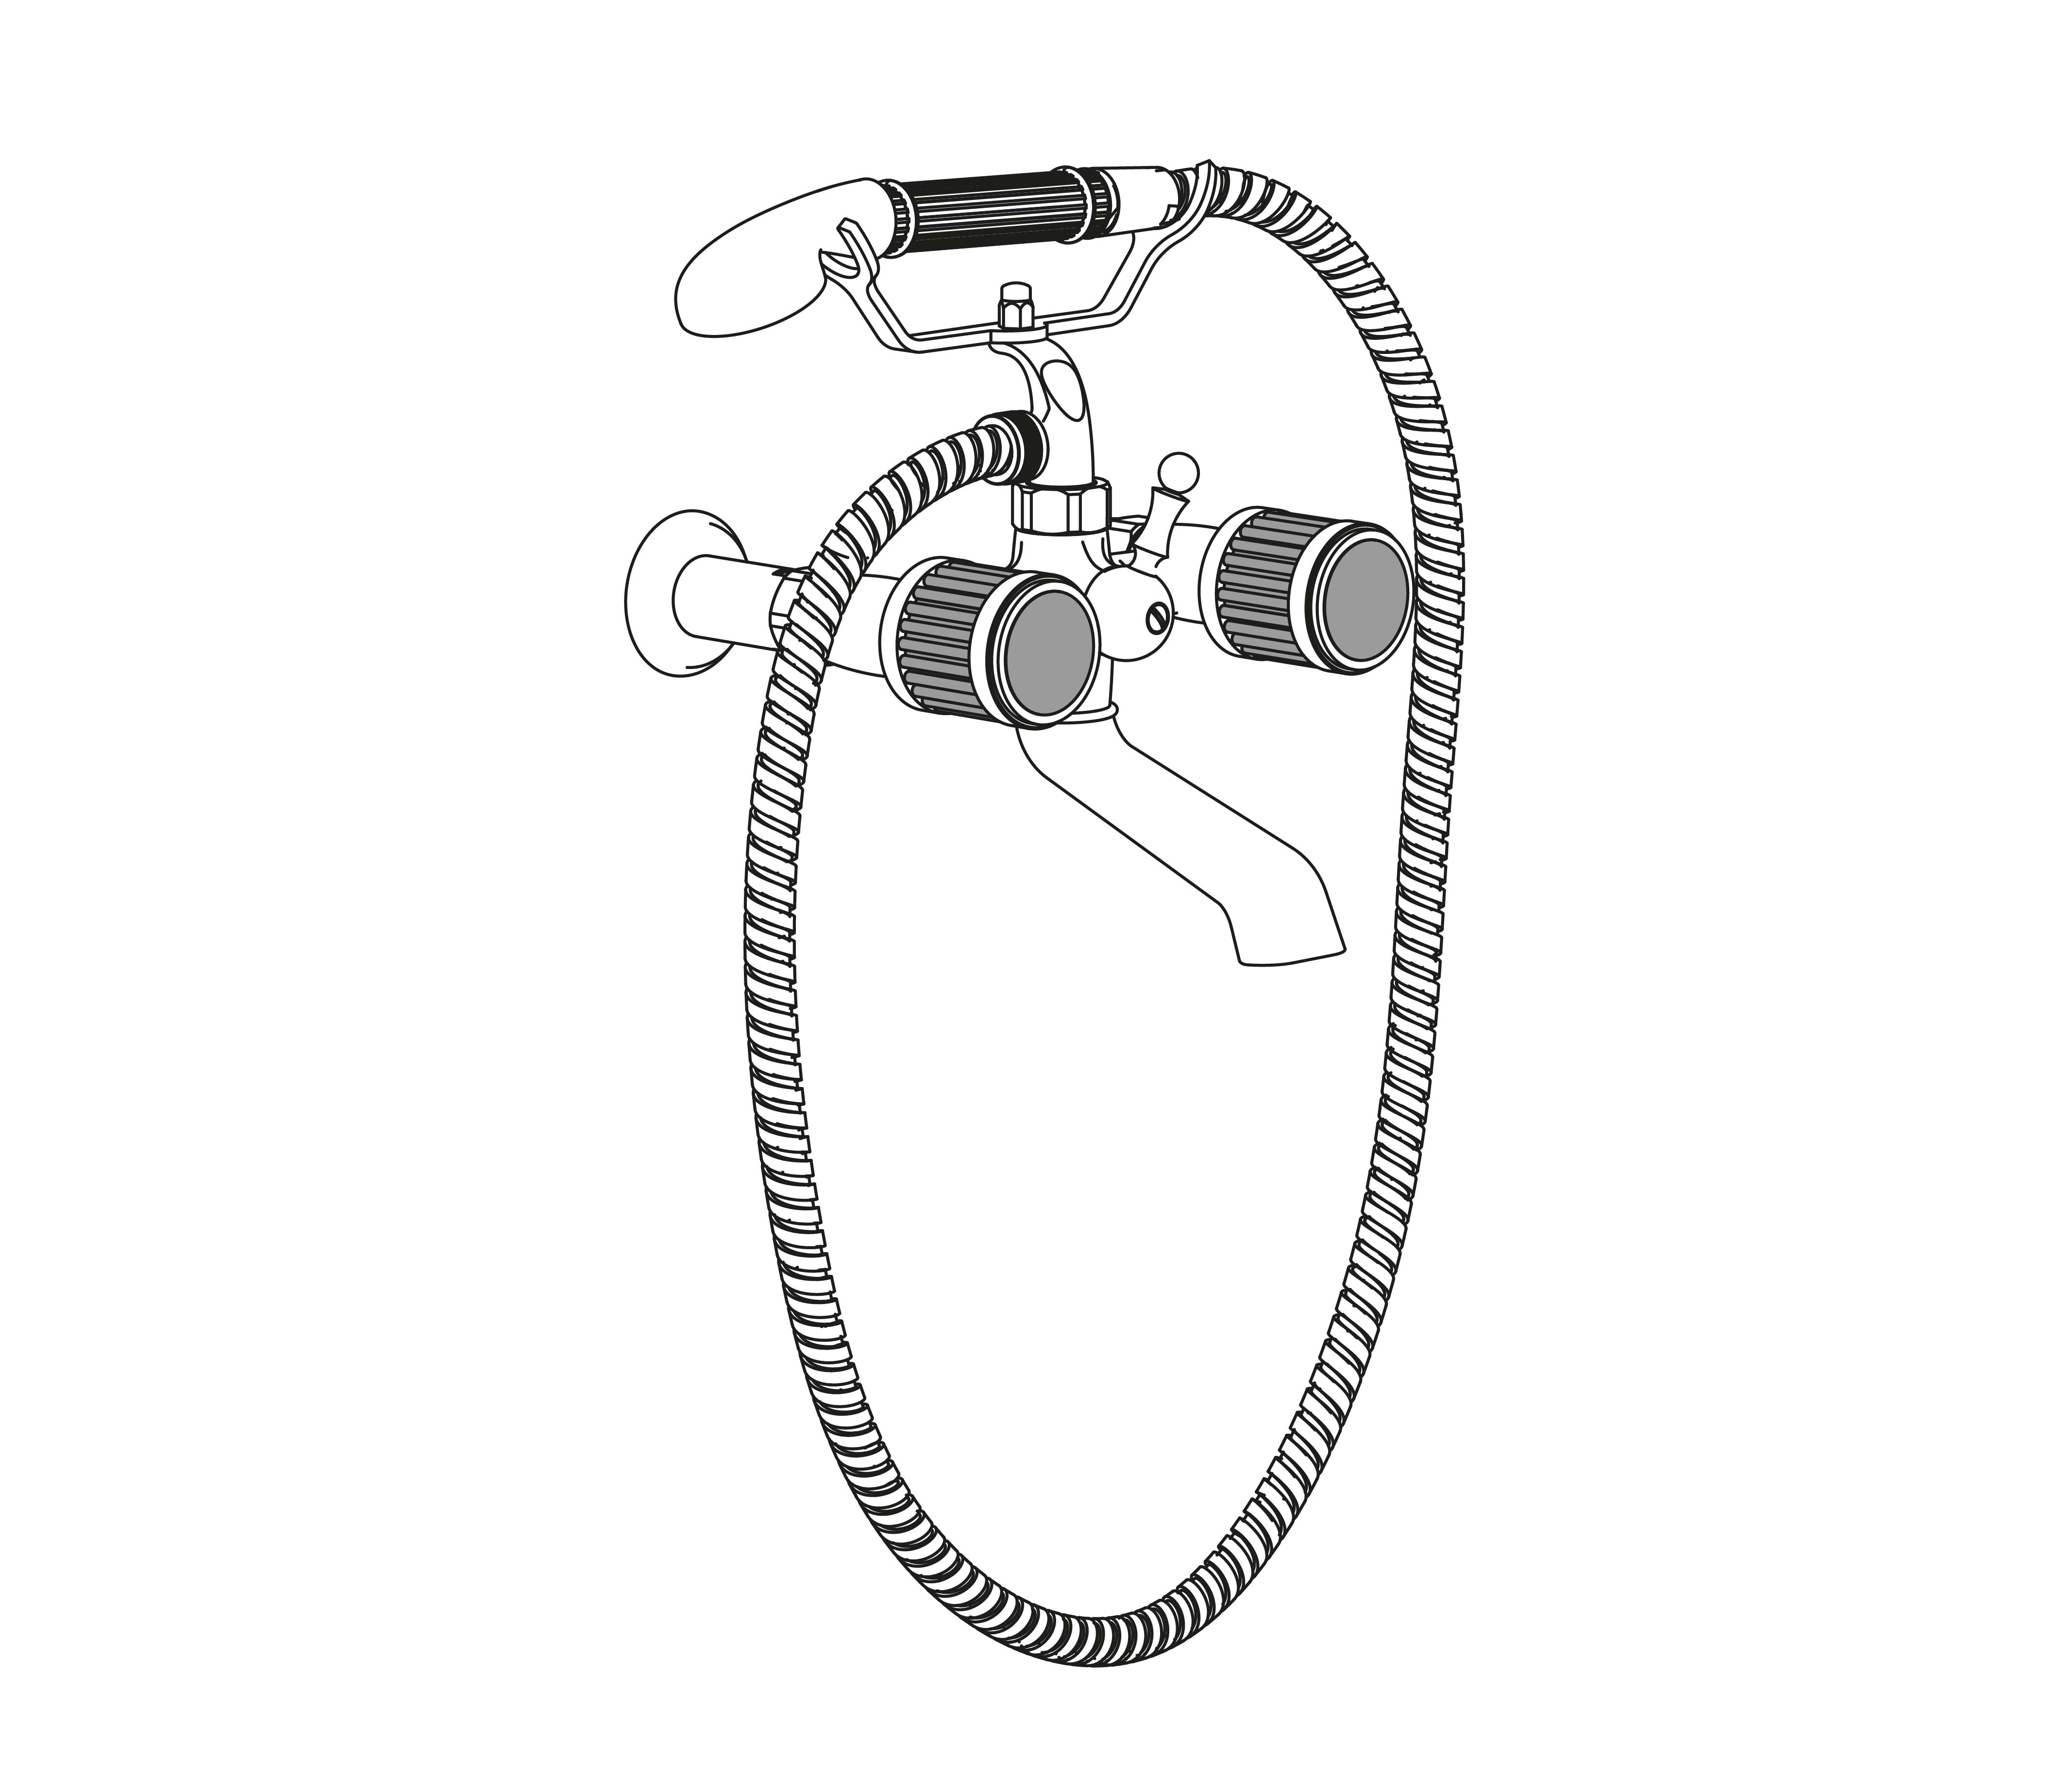 S100-3201 Wall mounted bath and shower mixer